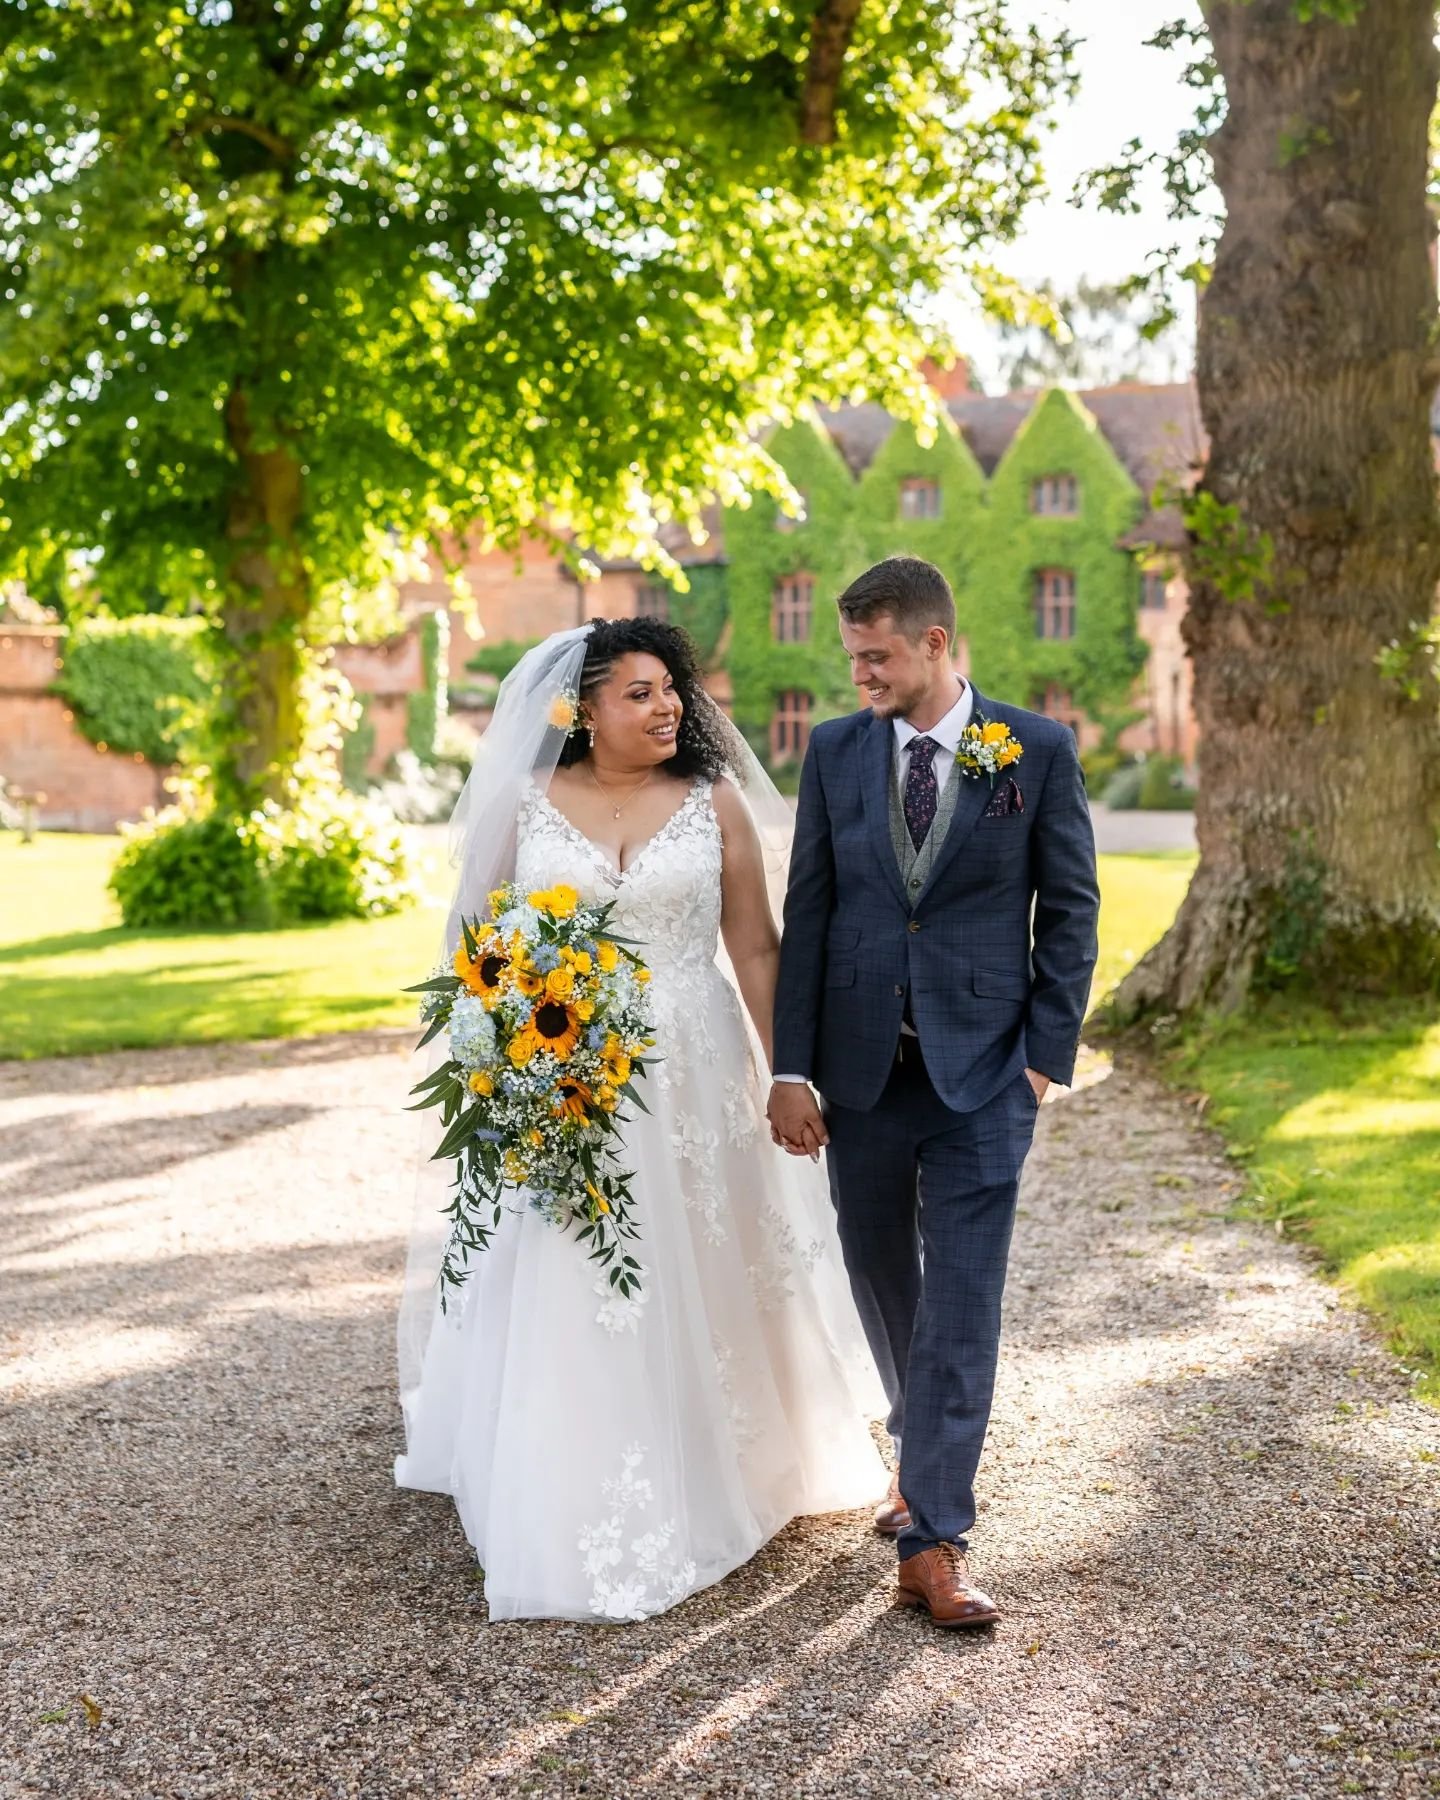 Congratulations to Marina &amp; George who tied the knot at the beautiful @woodhallmanor on Monday! It was such a gorgeous day filled with love and laughter, rain and shine, and an abundance of sunflowers 🌻